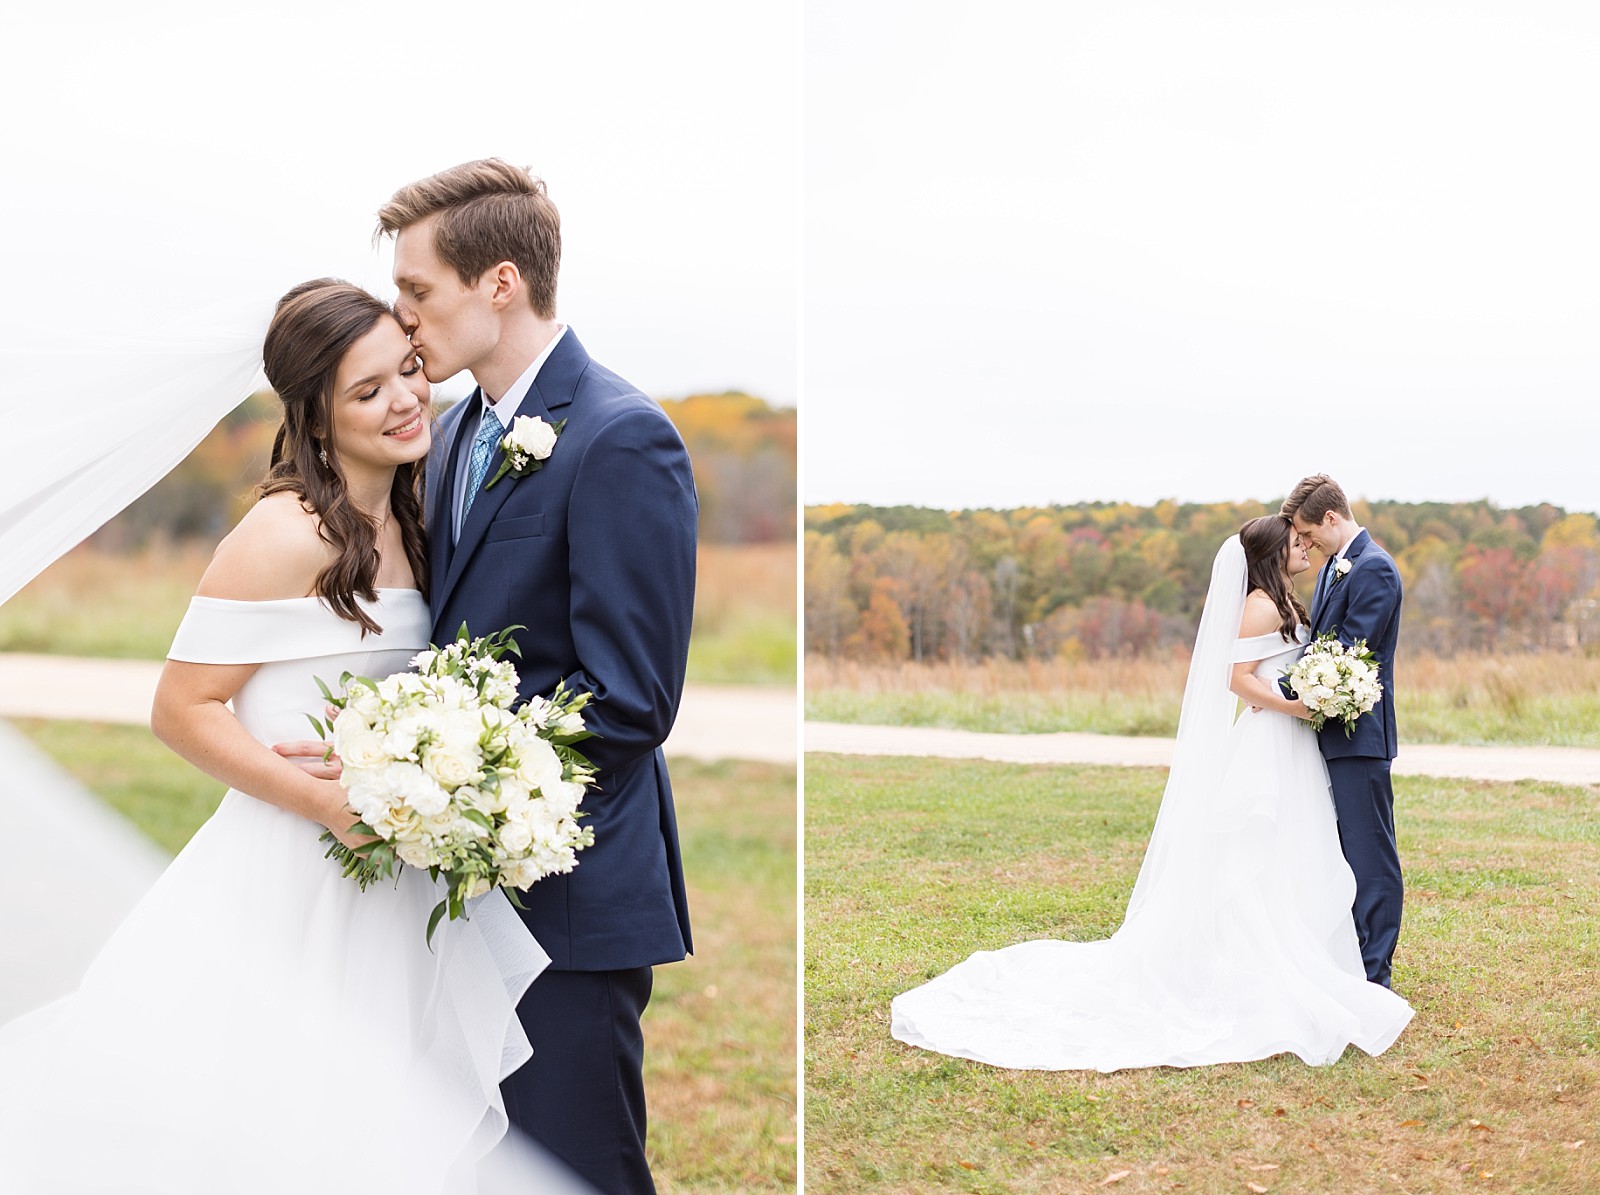 Brides veil blowing in the wind | Fall Wedding at The Meadows in Raleigh | Raleigh NC Wedding Photographer